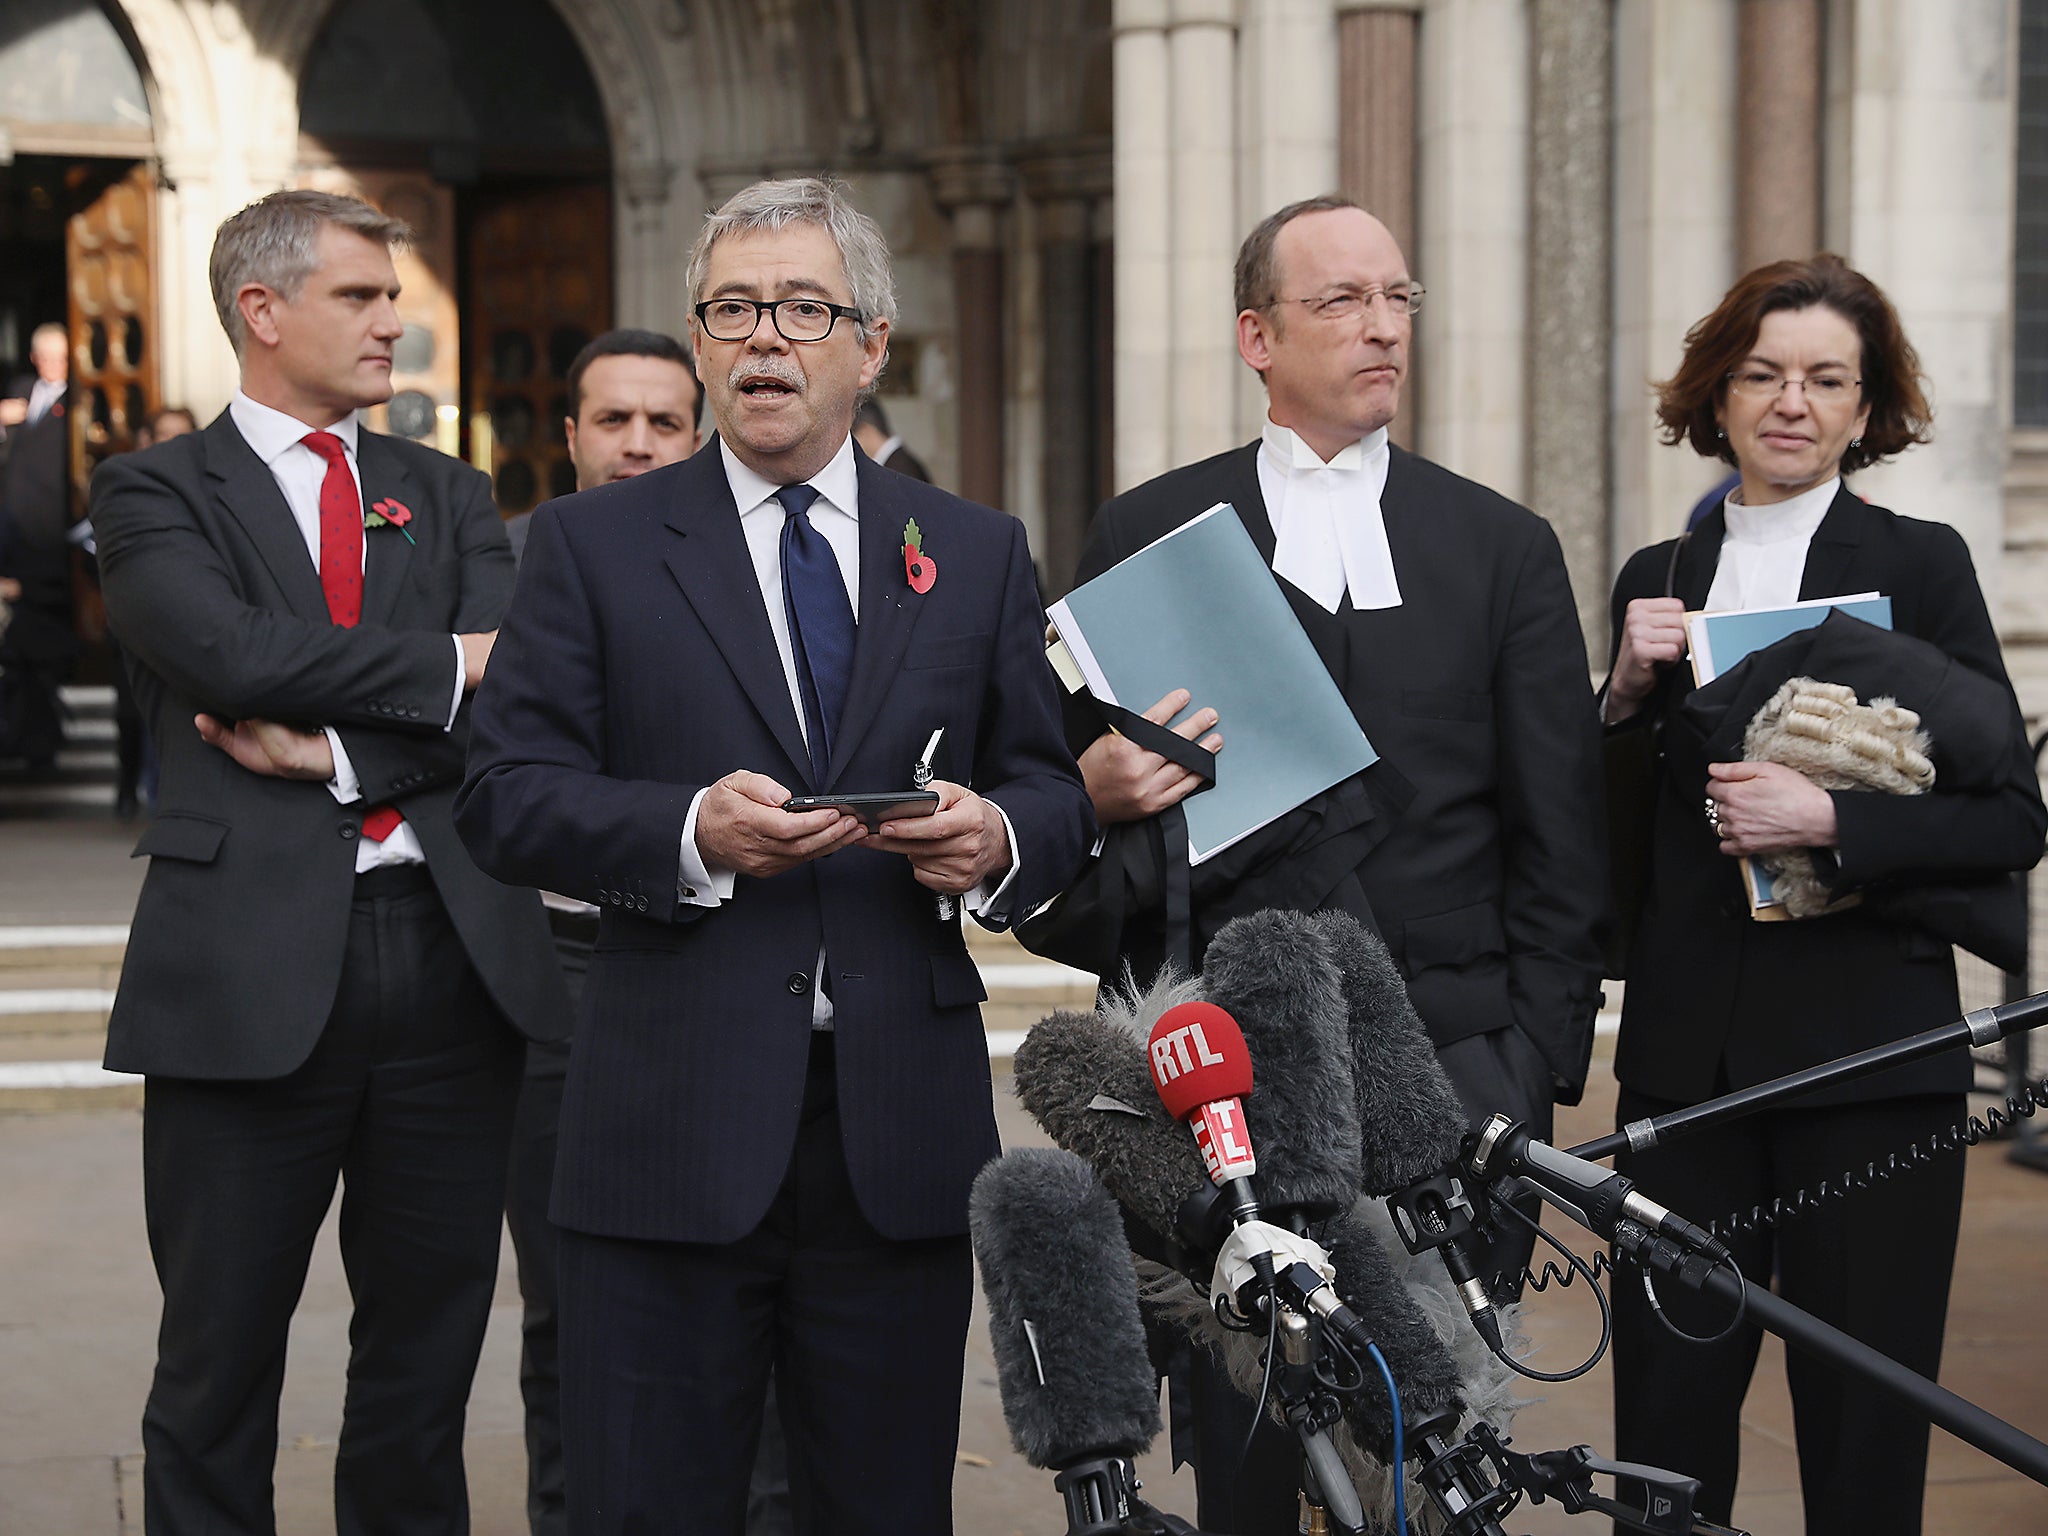 Lawyer for Deir dos Santos, David Green speaks after the High Court decides that the Prime Minister cannot trigger Brexit without the approval of the MP's at The Royal Courts Of Justice